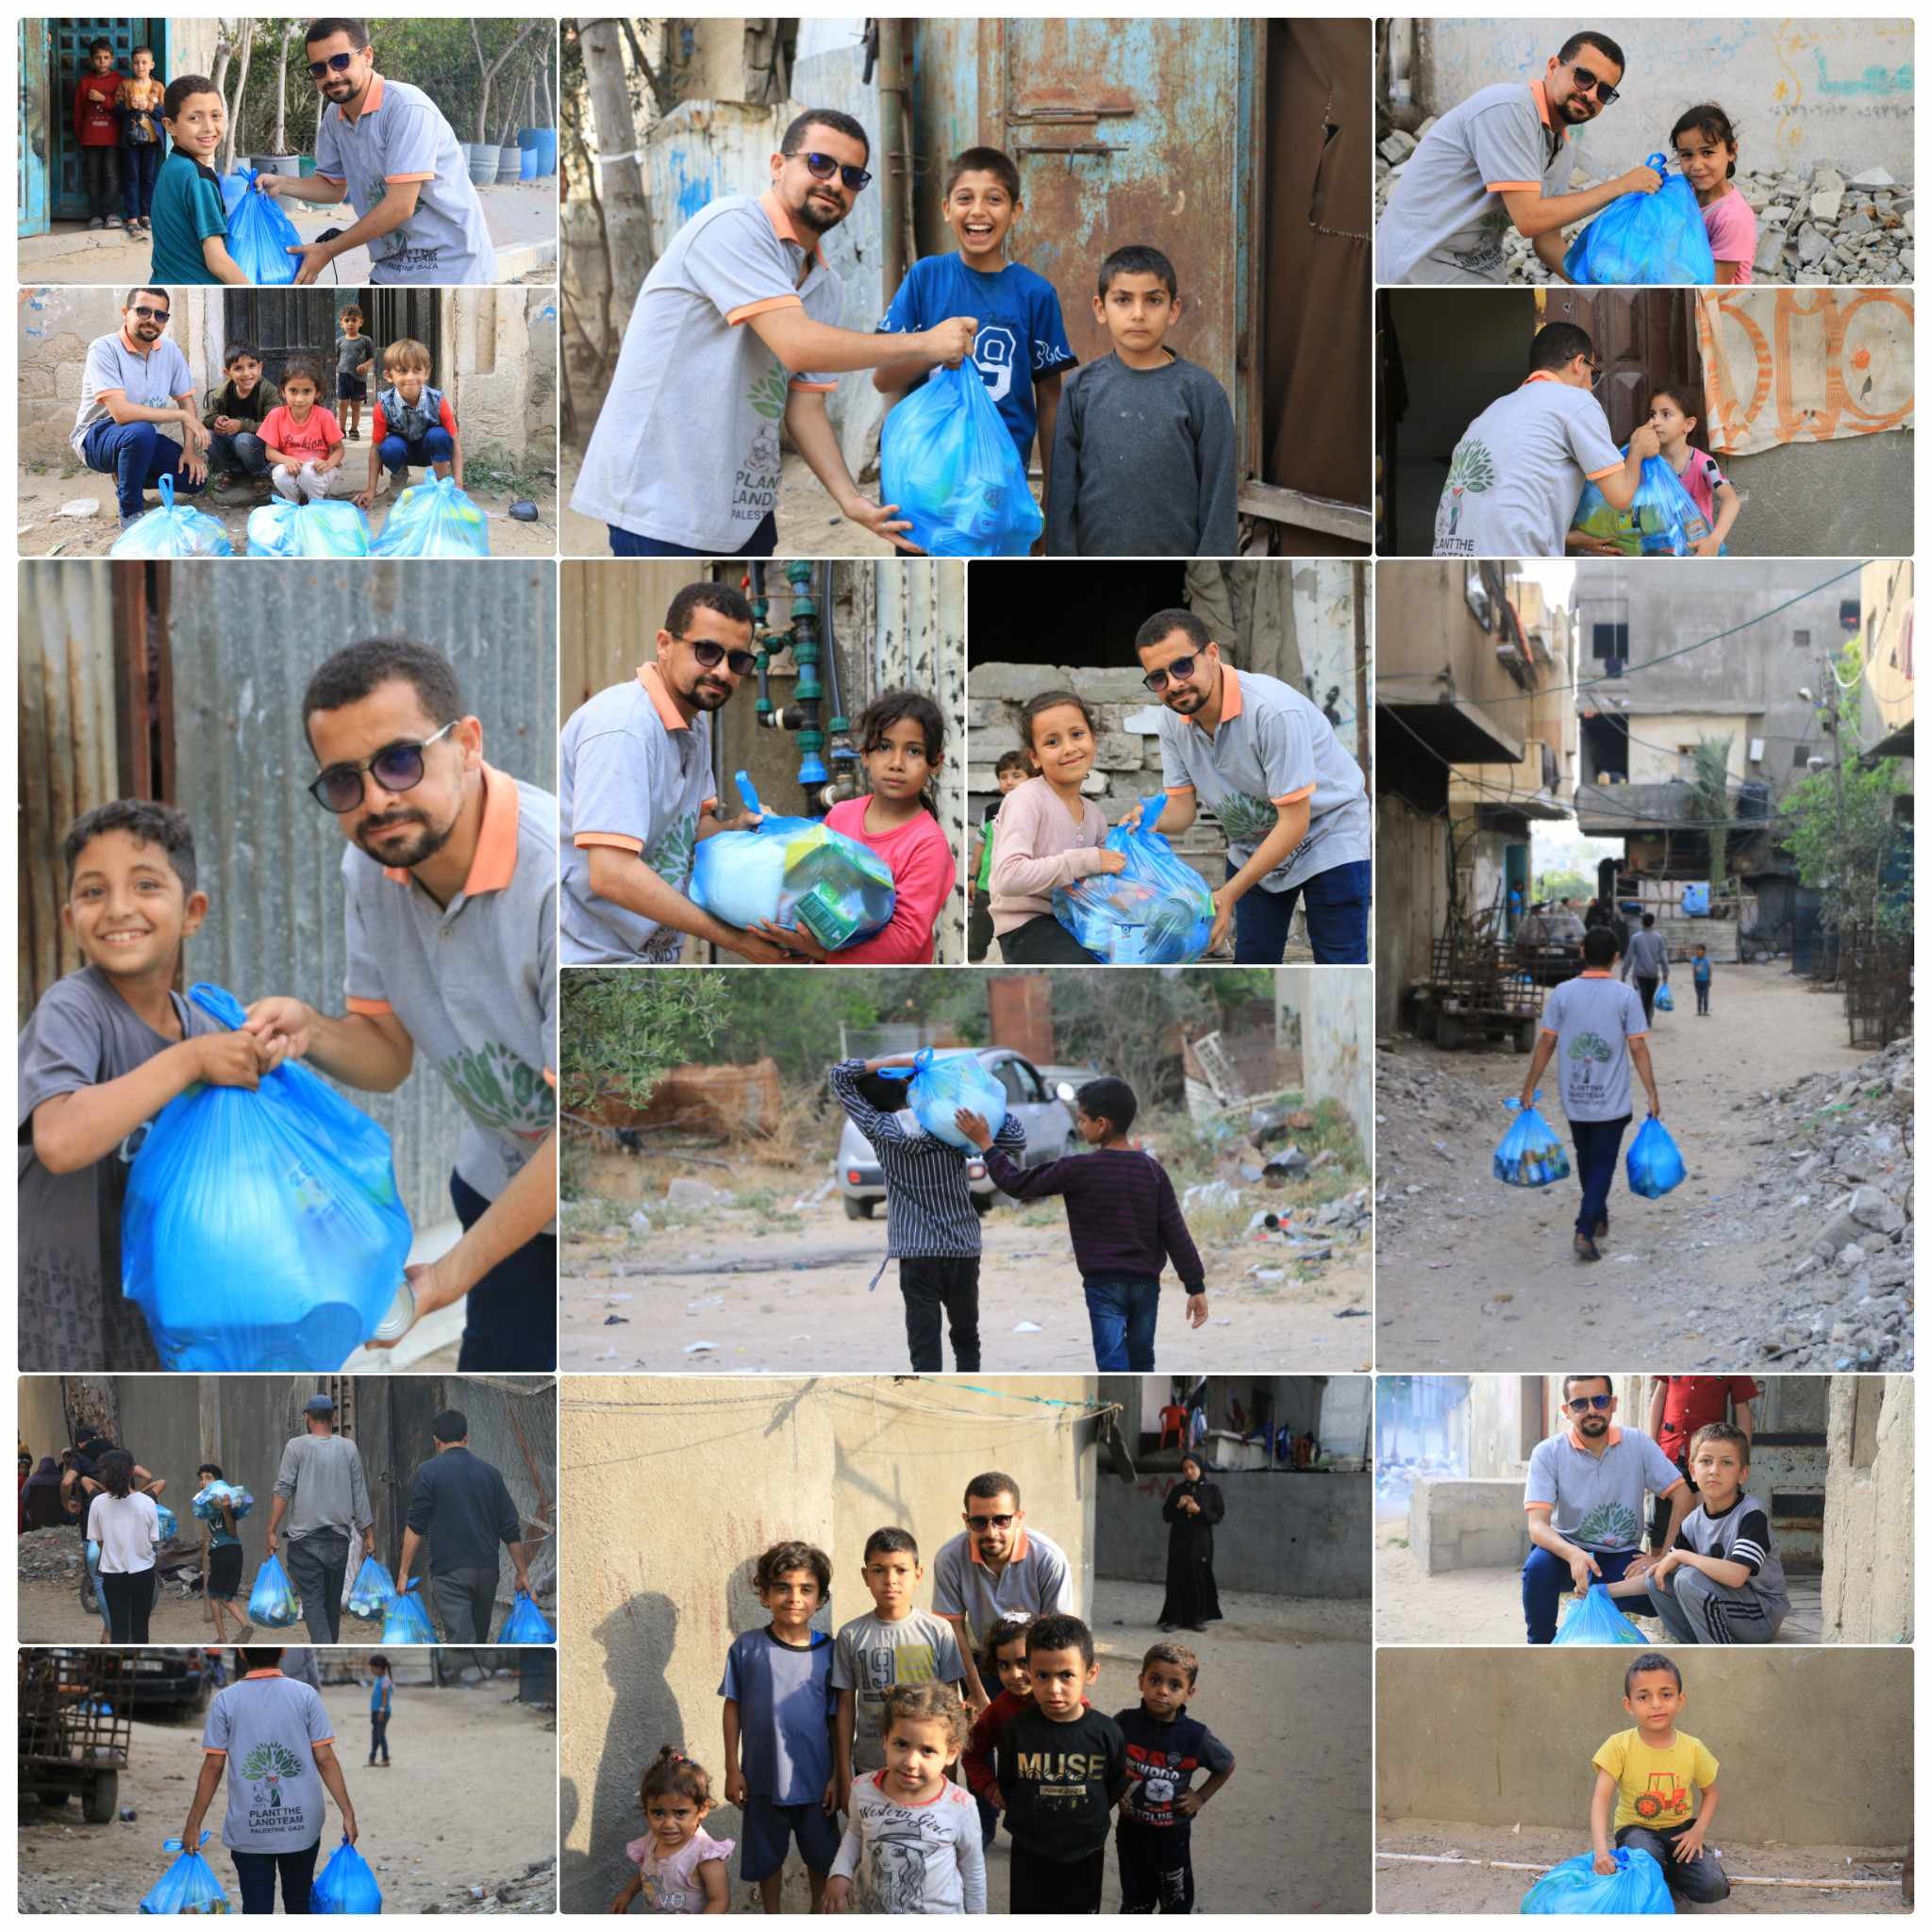 Photos of Anas from Plant the Land Team Gaza and some children in Gaza.